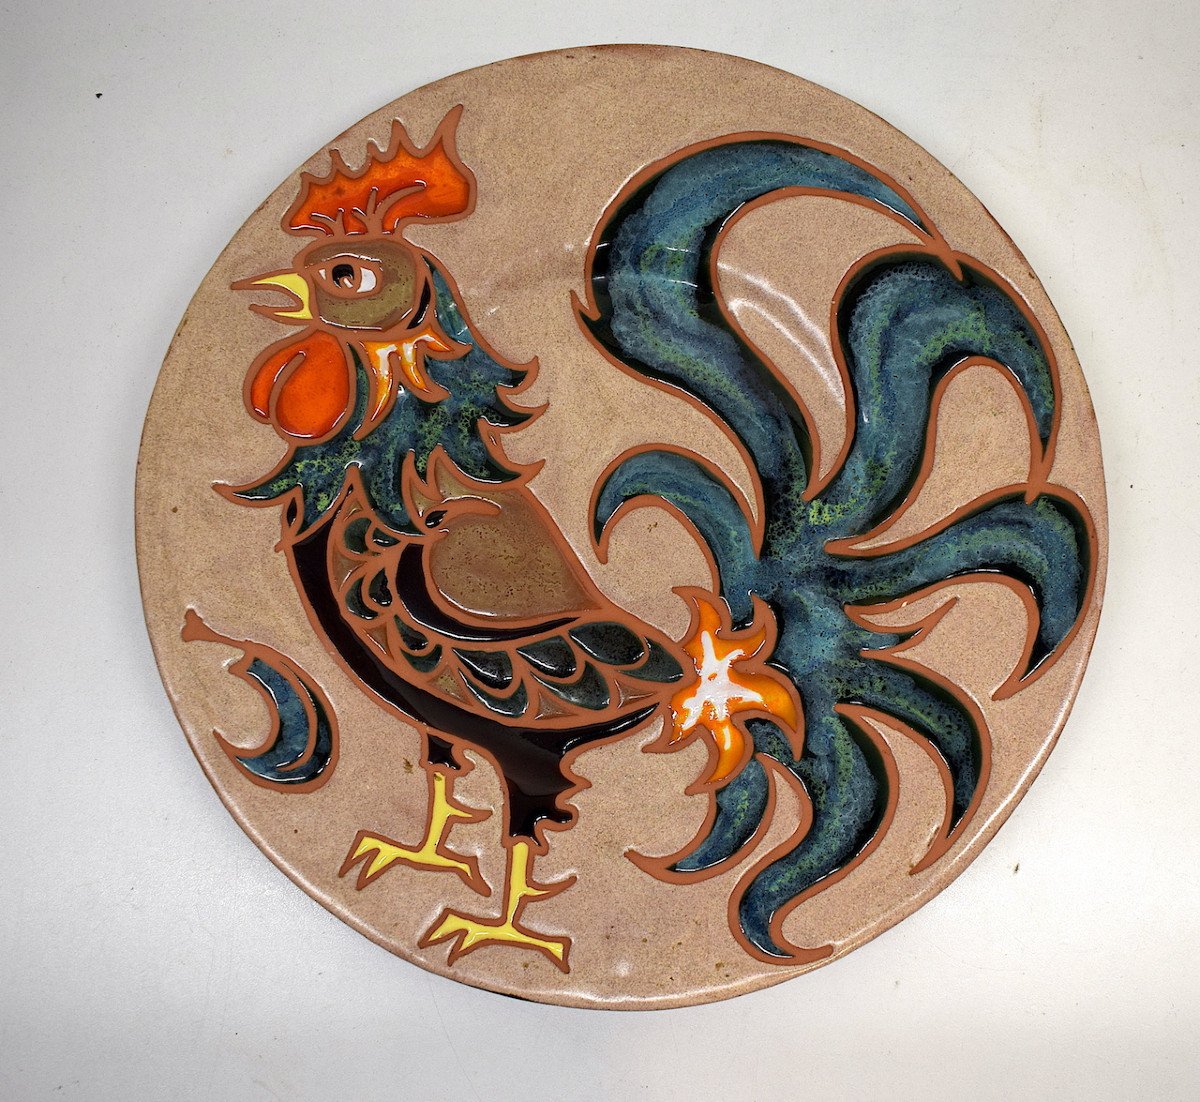 Paul Azema Ceramic Animal Dish With Rooster Circa 1960 1970 Ref607